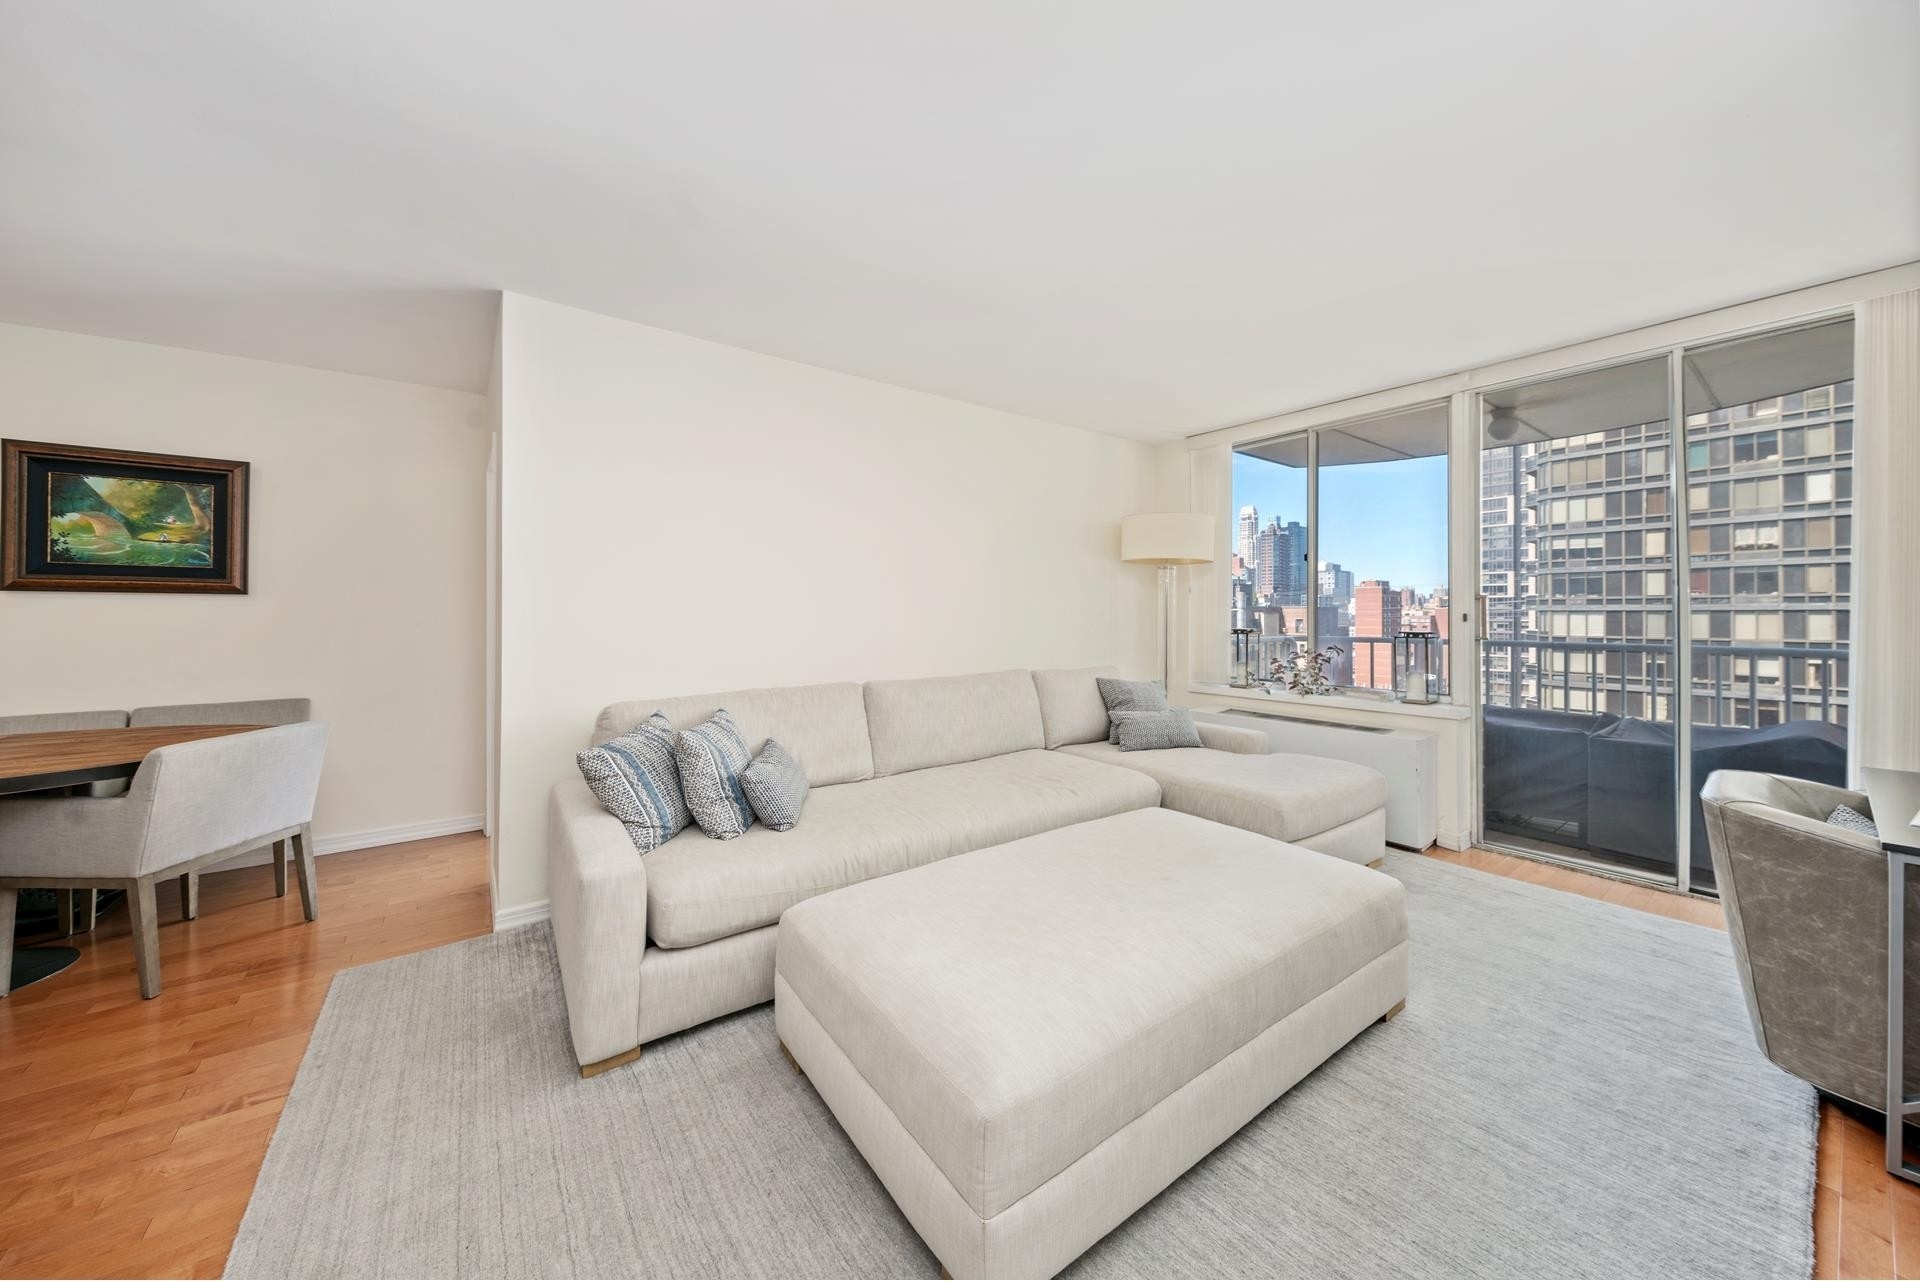 Condominium for Sale at Sutton View, 420 E 58TH ST, 19B Sutton Place, New York, NY 10022